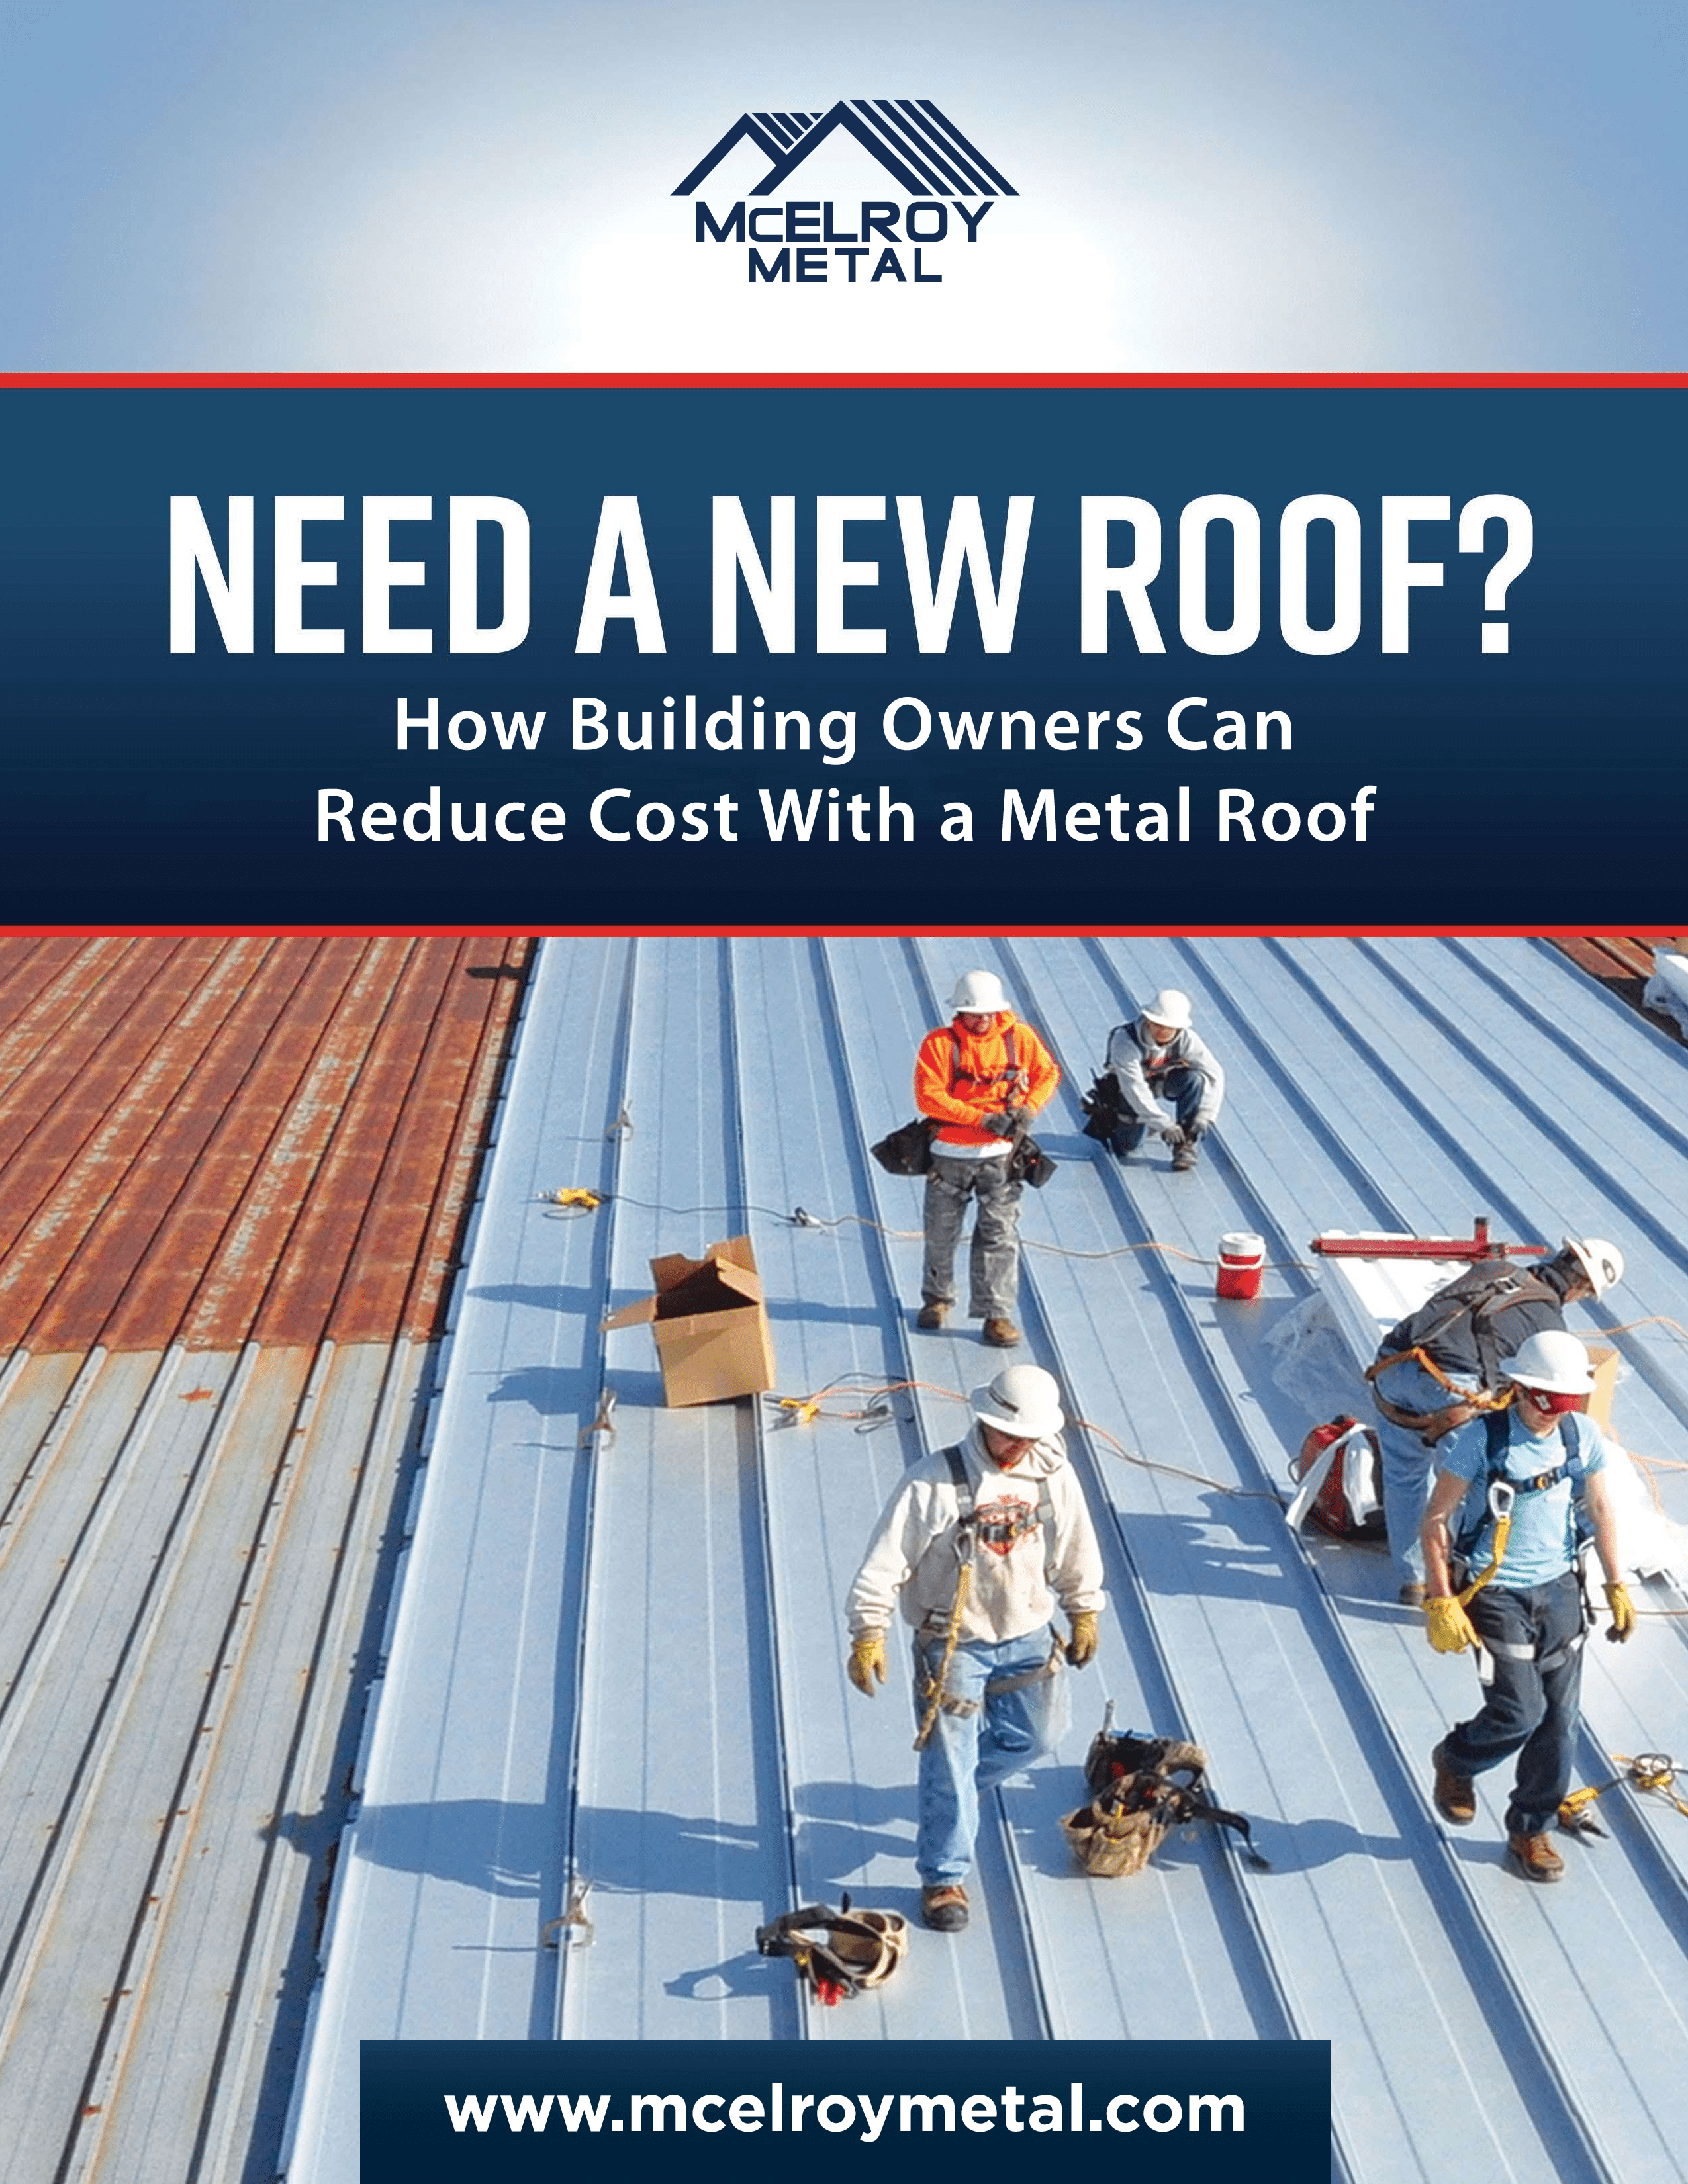 McElroy Metal eBook - Need a new roof?  How building owners can reduce cost with a metal roof